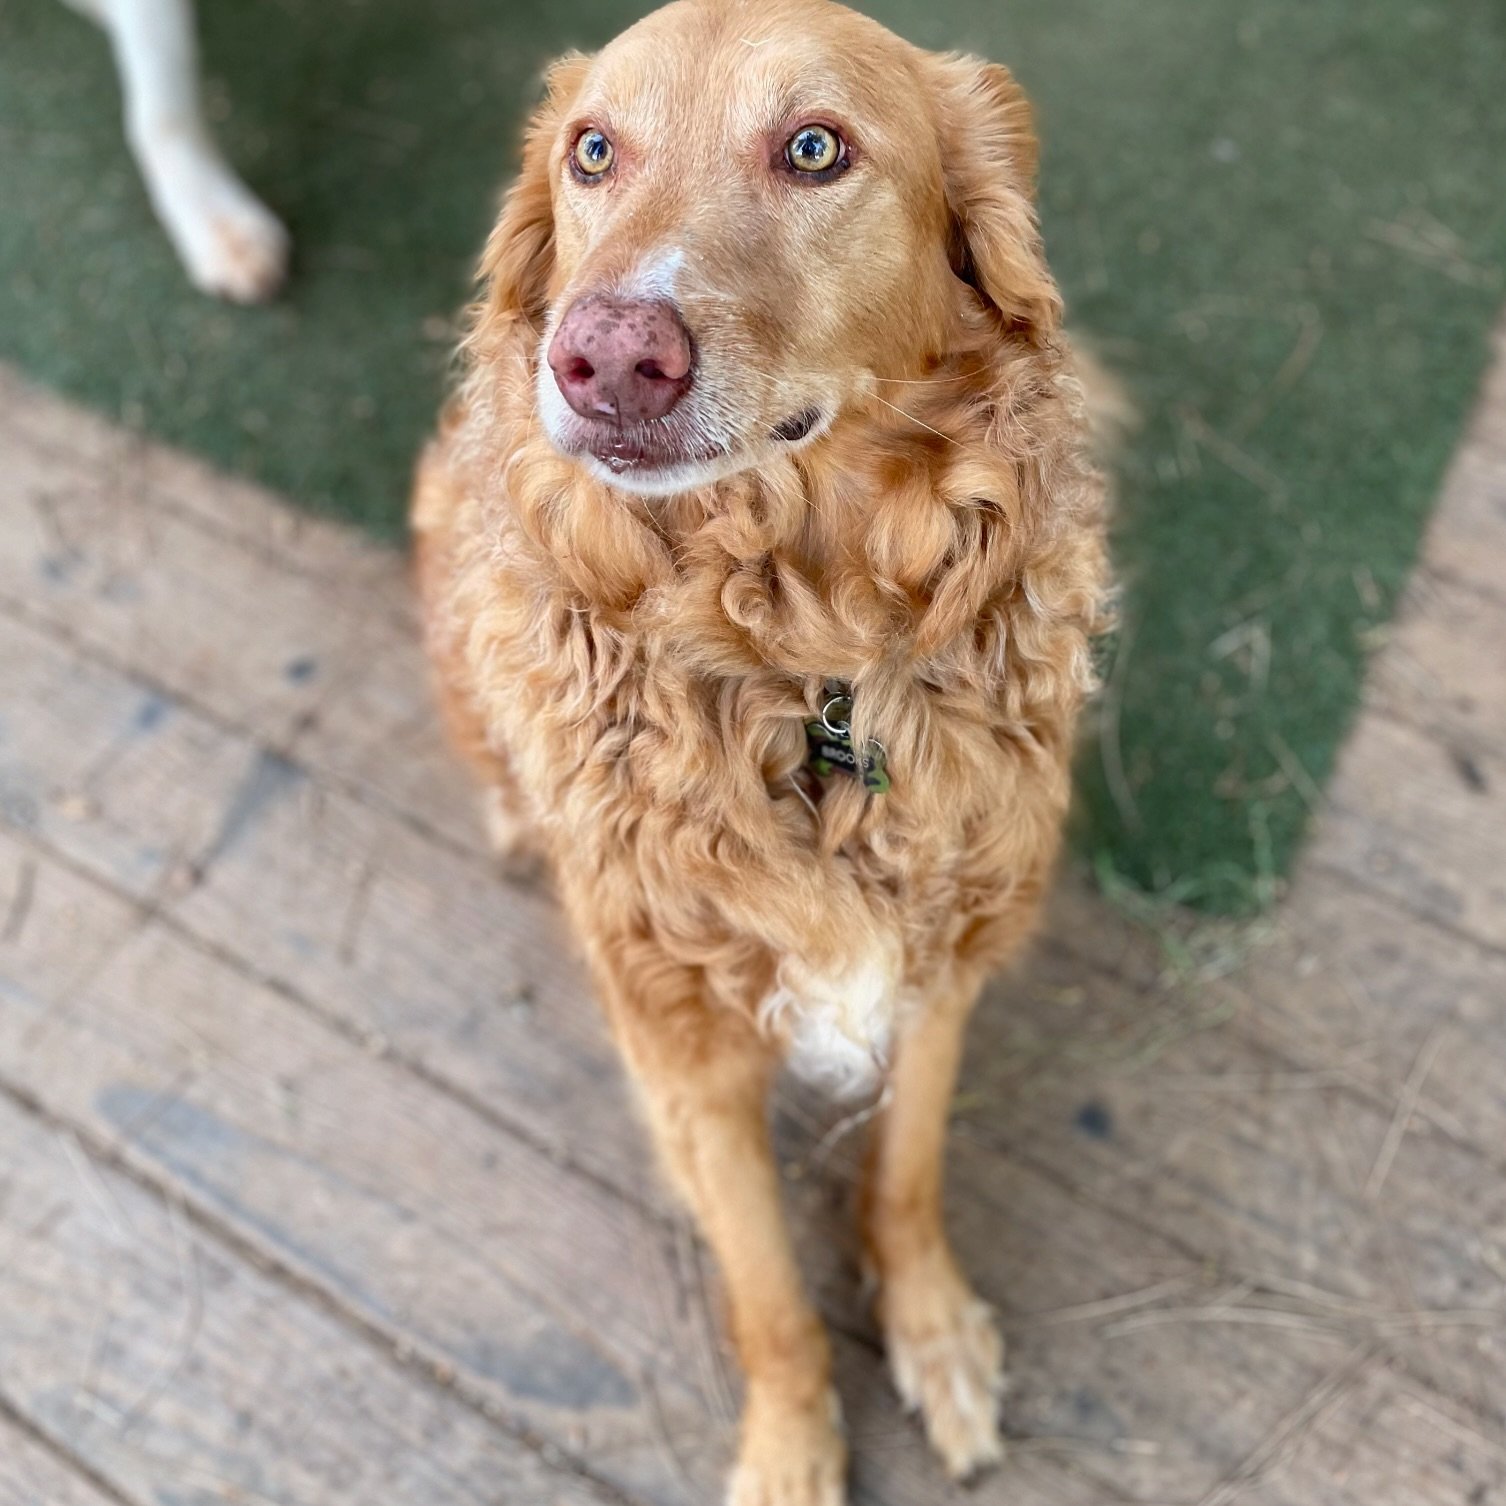 Brooks is quite the dapper gentleman🐶🐾
🐶Brooks, 8 year old Golden Retriever/Border Collie Mix from Grass Valley, CA
.
.
.
#dogboarding #dogdaycare #goldenretriever #bordercollie